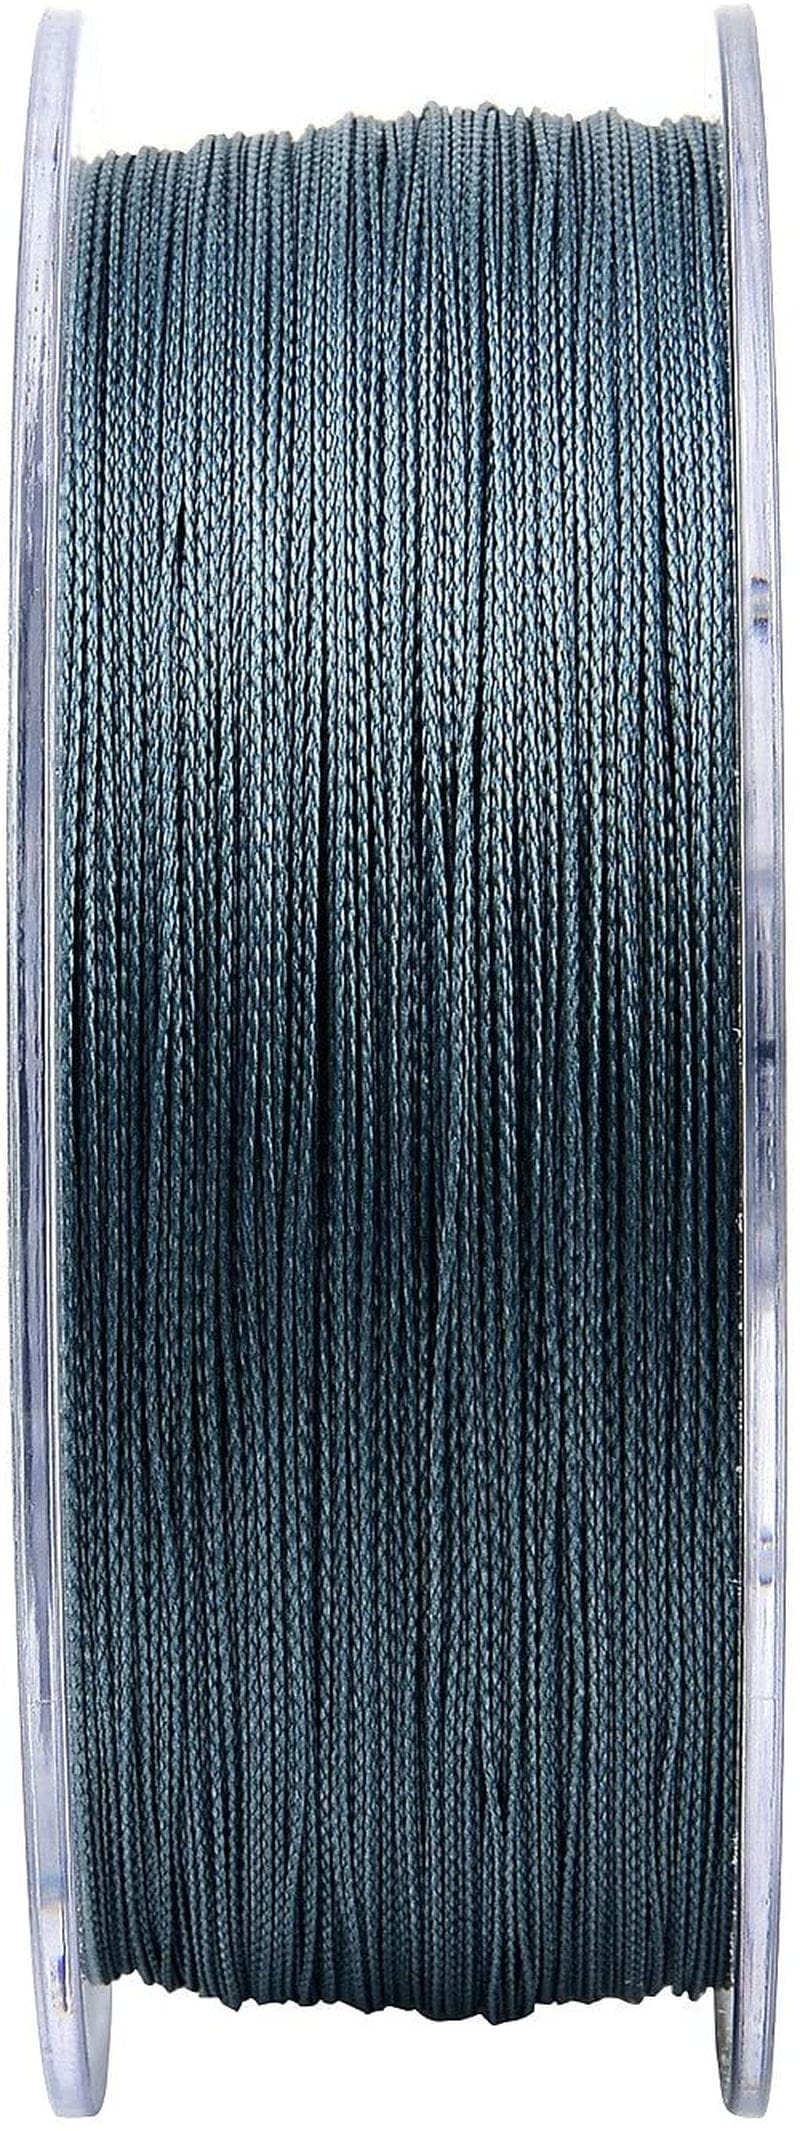 Kastking Superpower Braided Fishing Line - Abrasion Resistant Braided Lines – Incredible Superline – Zero Stretch – Smaller Diameter – a Must-Have! Sporting Goods > Outdoor Recreation > Fishing > Fishing Lines & Leaders Eposeidon   